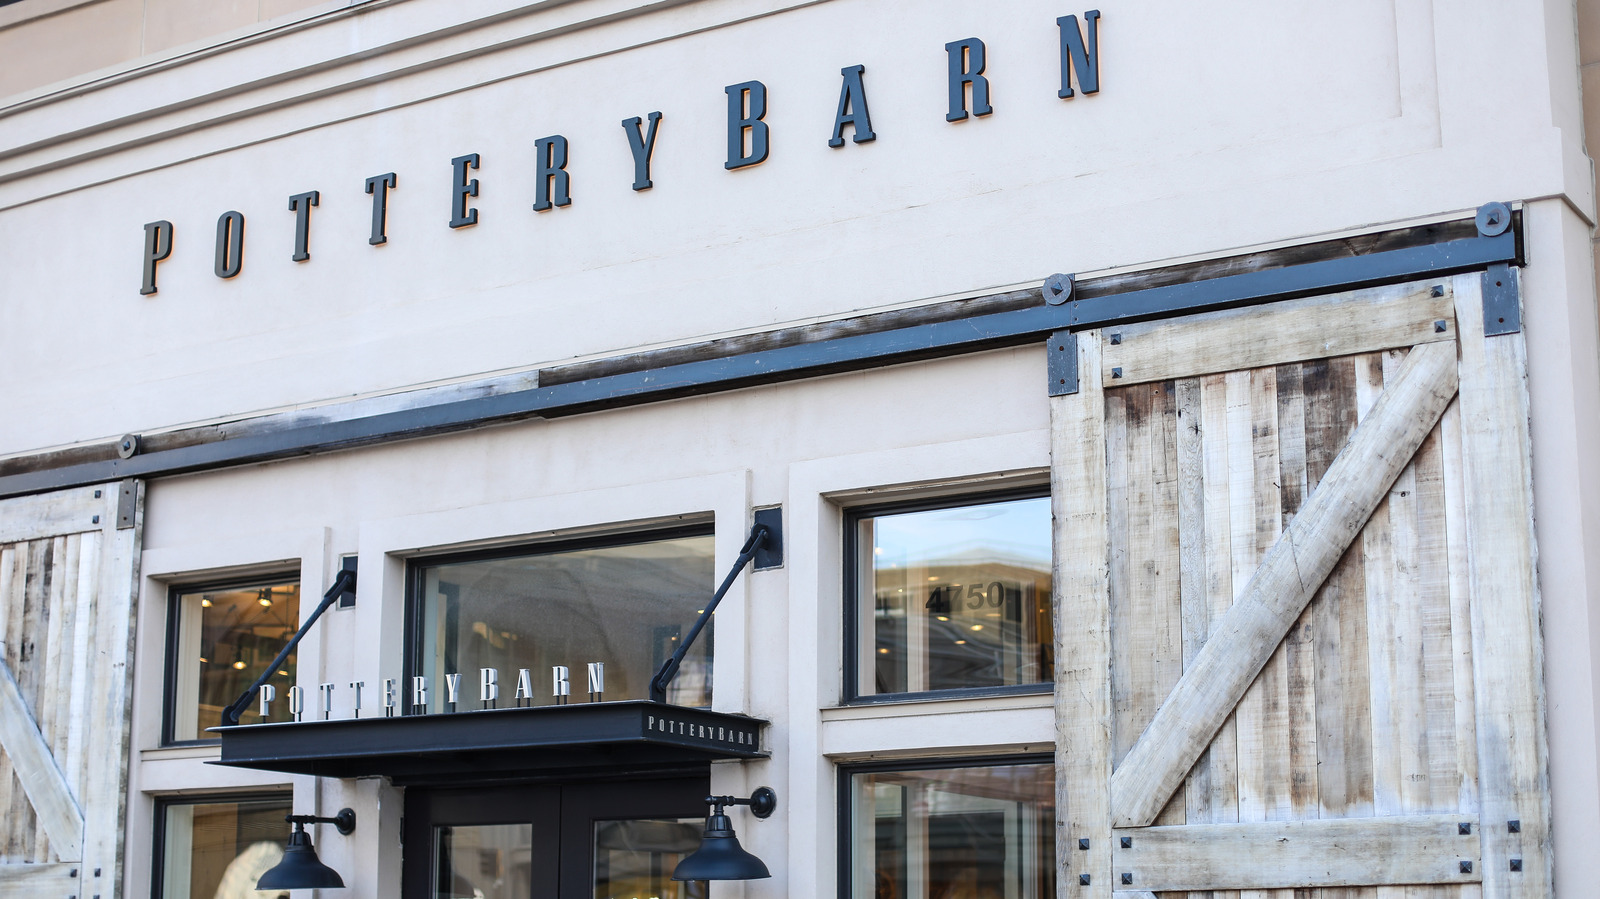 New Green Hills Pottery Barn to open this week